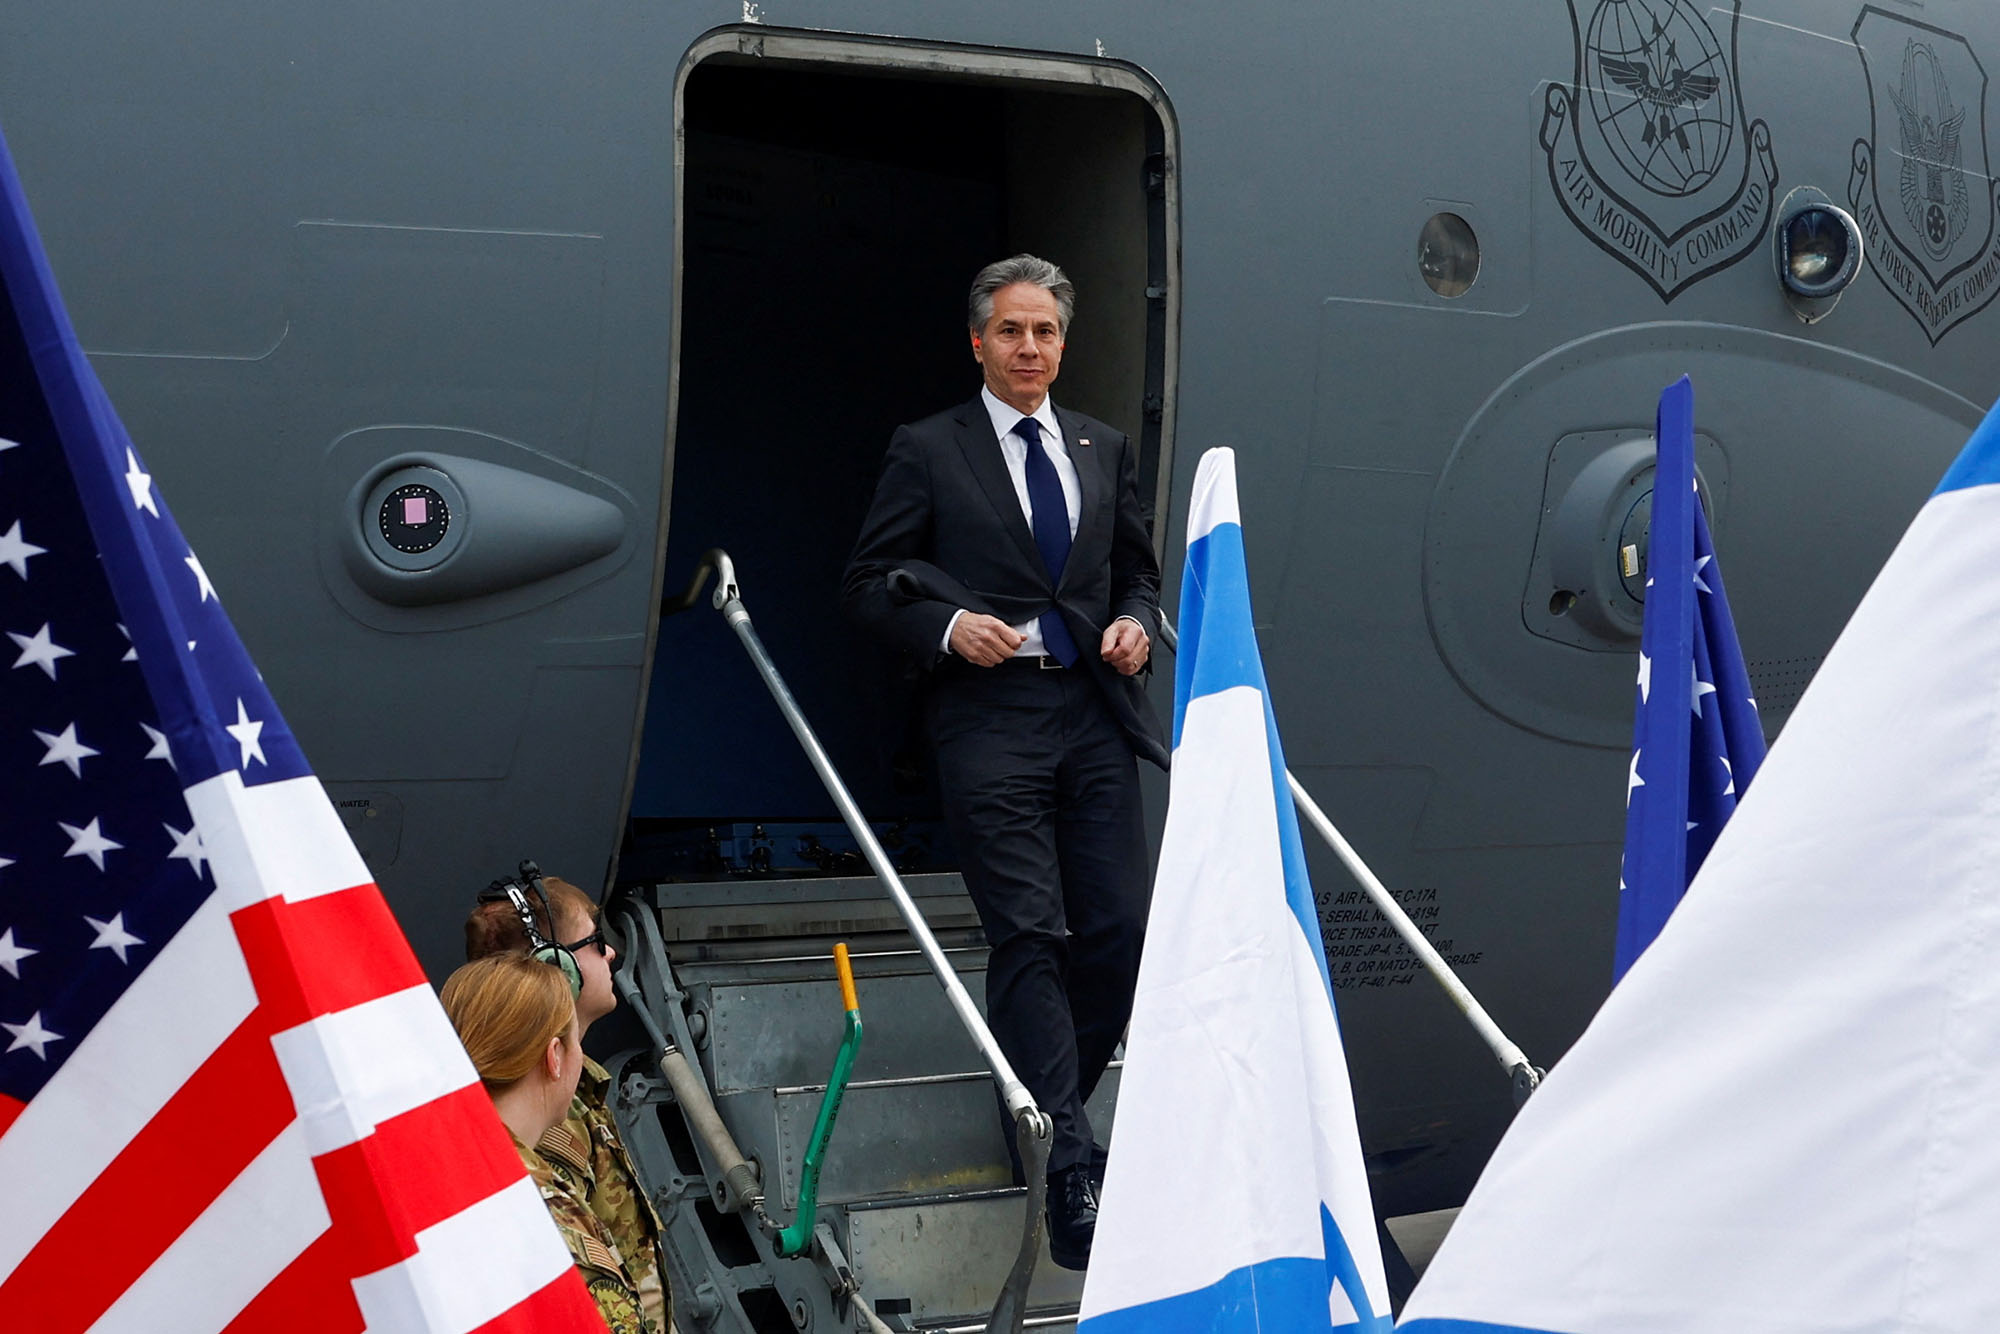 US Secretary of State Antony Blinken disembarks from an aircraft as he arrives in Tel Aviv, Israel, on March 22.